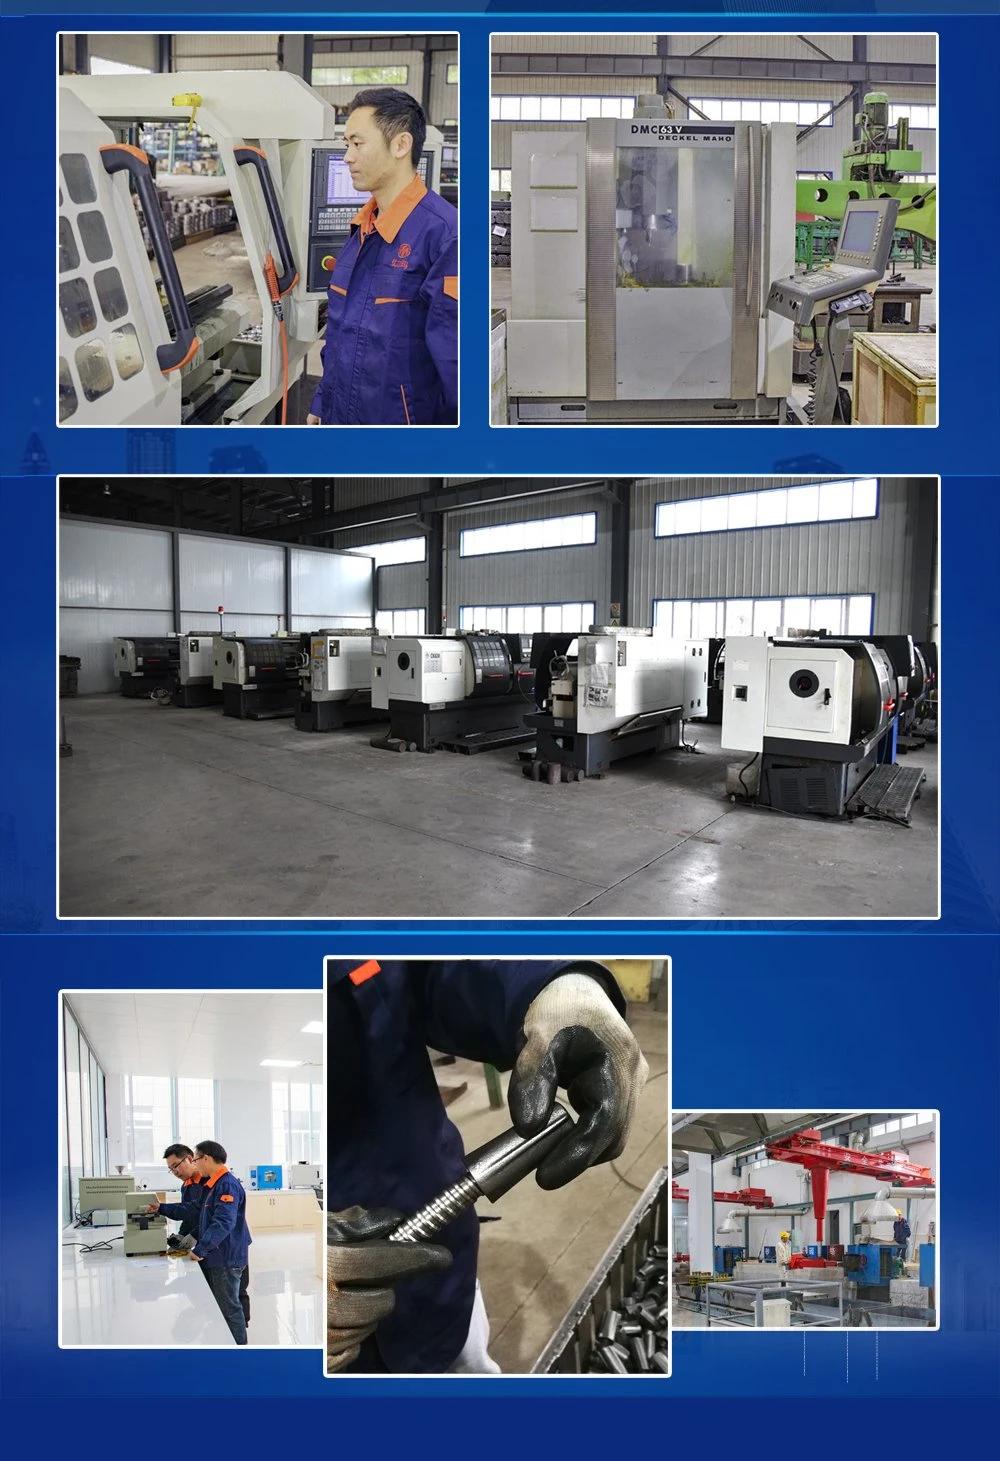 Component, Machining, Construction, Equipment, Assembling, Power Fitting, Accessories